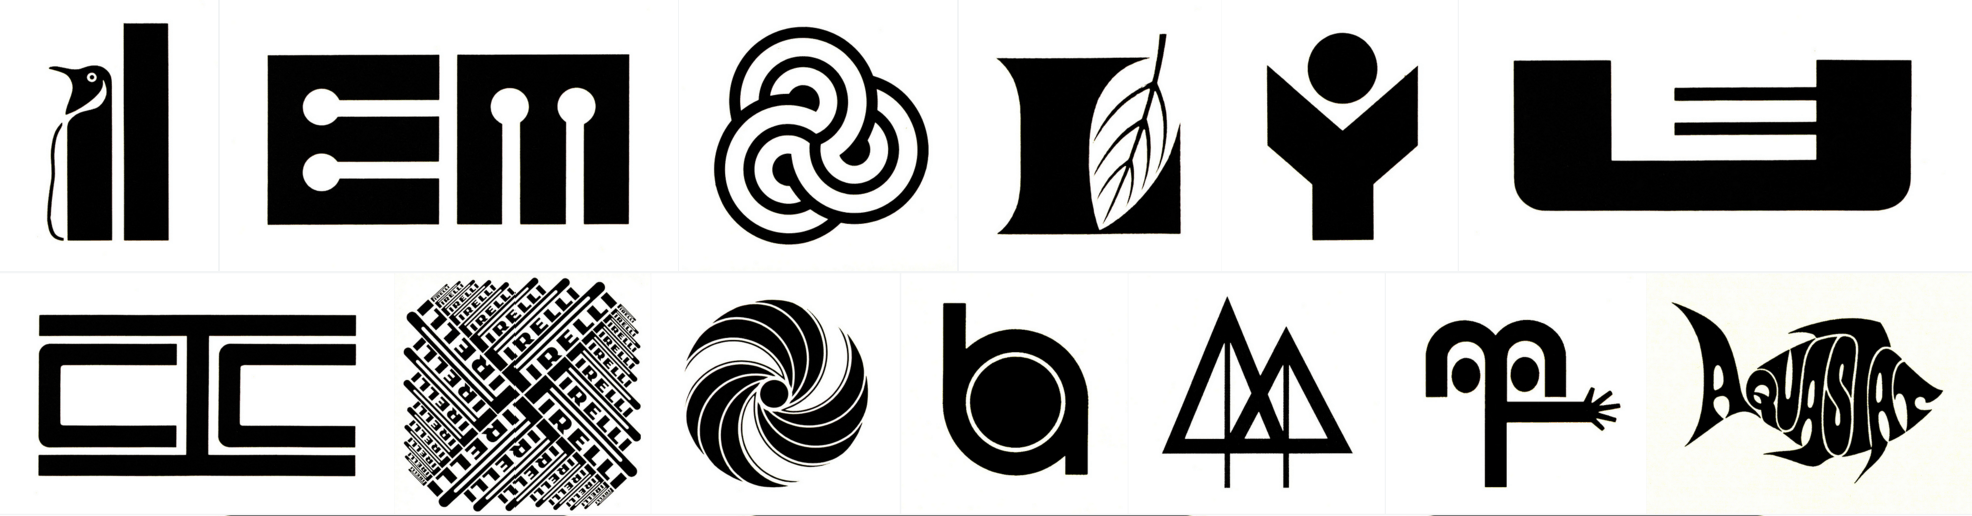 1970s Logo - Monochrome logos from the 50s and 70s